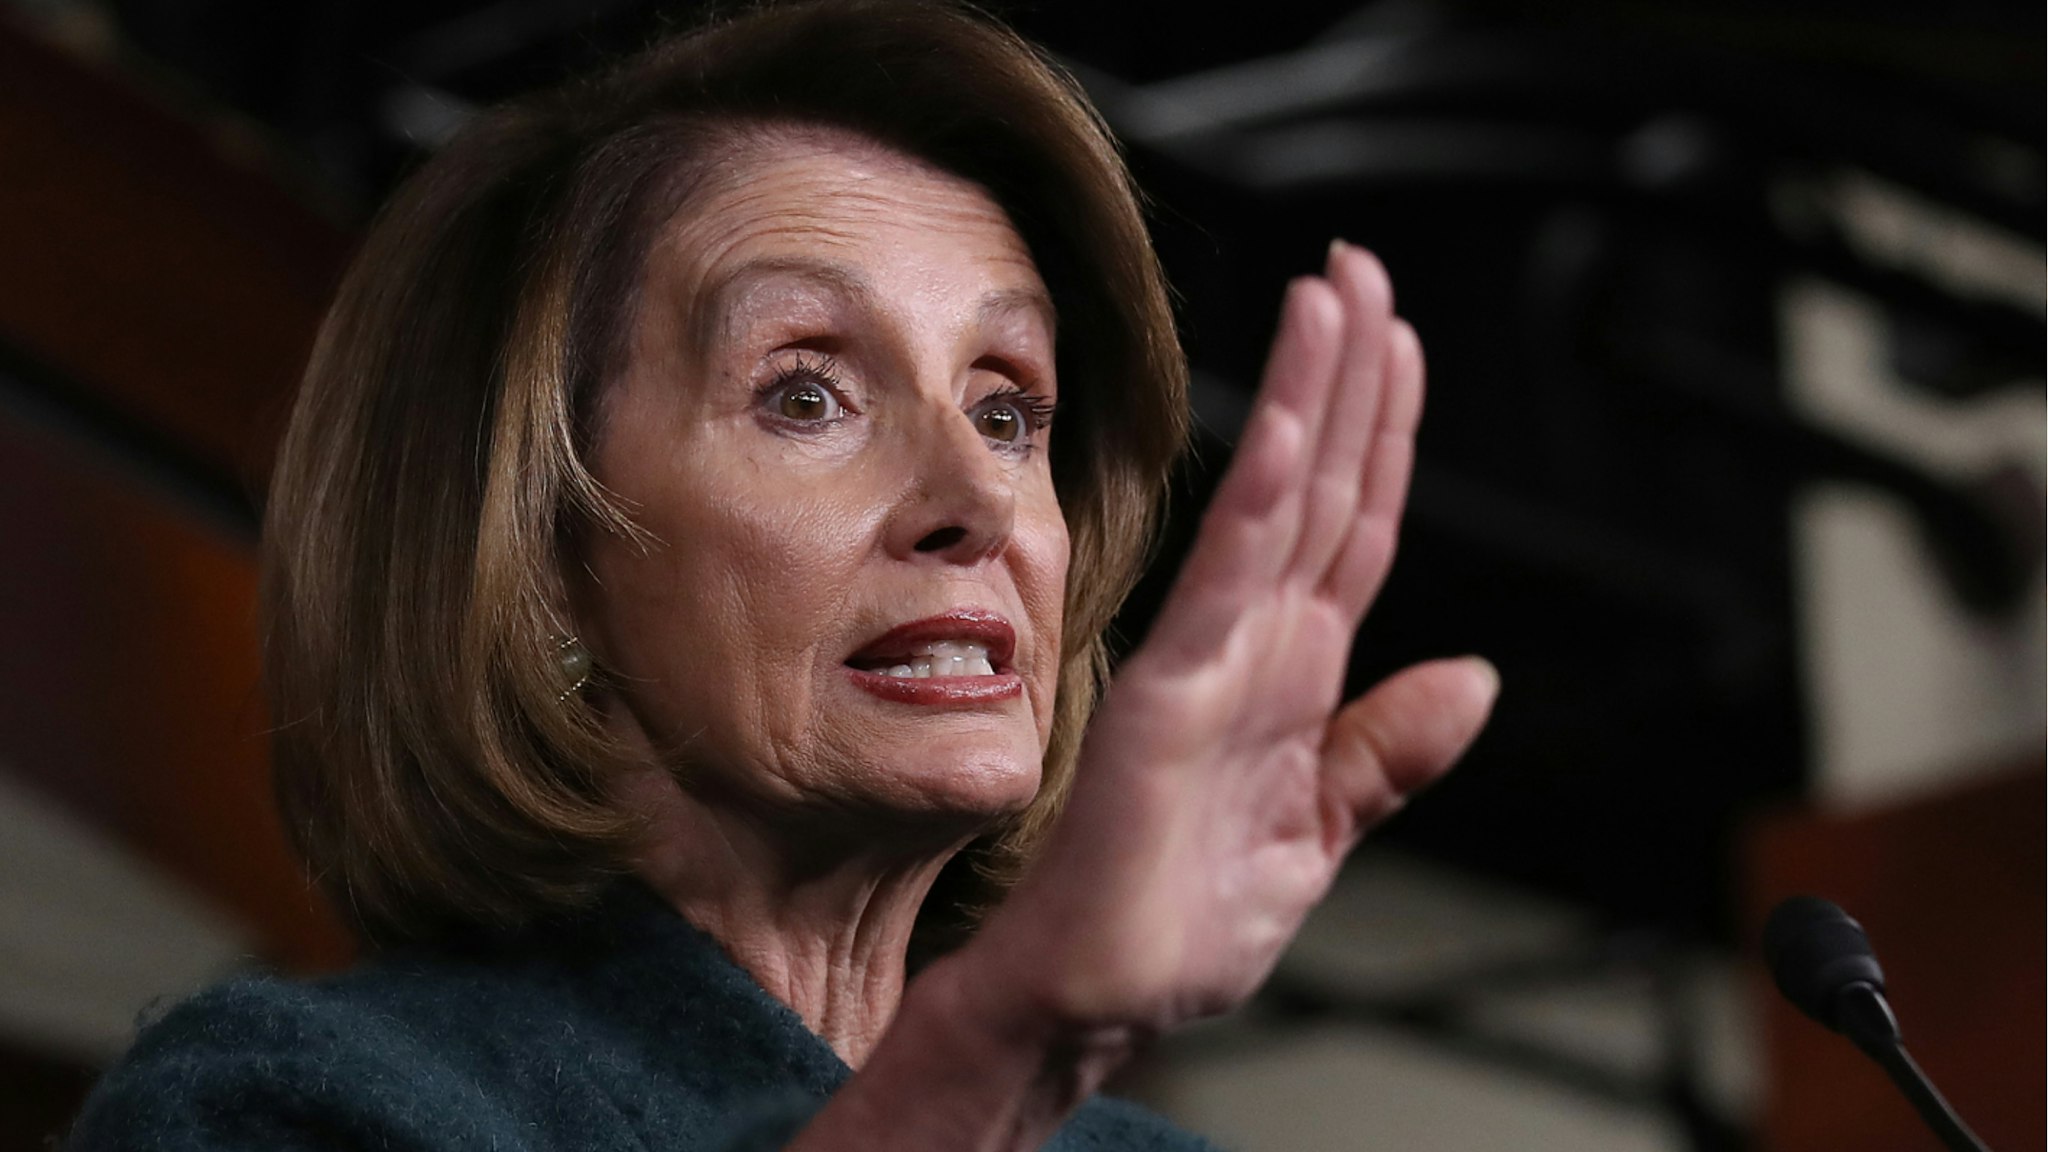 U.S. Speaker of the House Nancy Pelosi (D-CA) answers questions during her weekly press conference January 10, 2019 in Washington, DC.